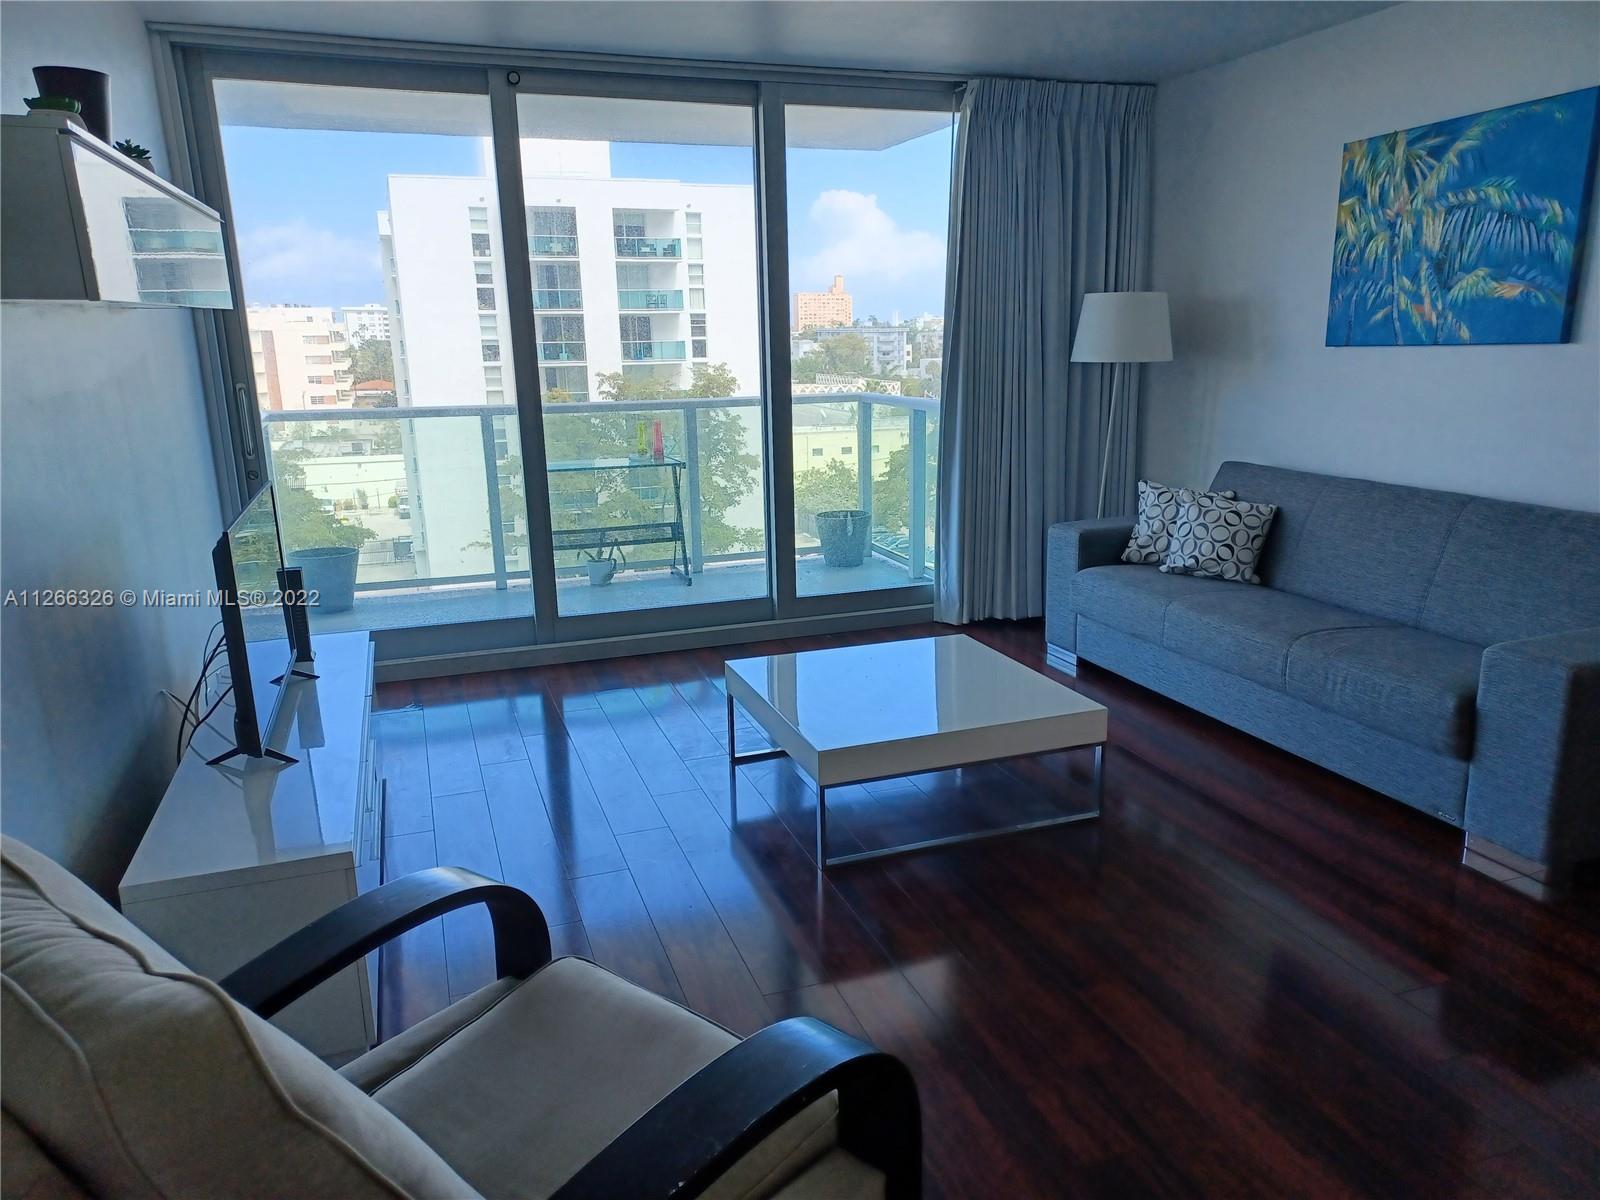 Location, Location, Location! This fantastic 1B/1b unit is furnished ready to move in. Beautiful El 